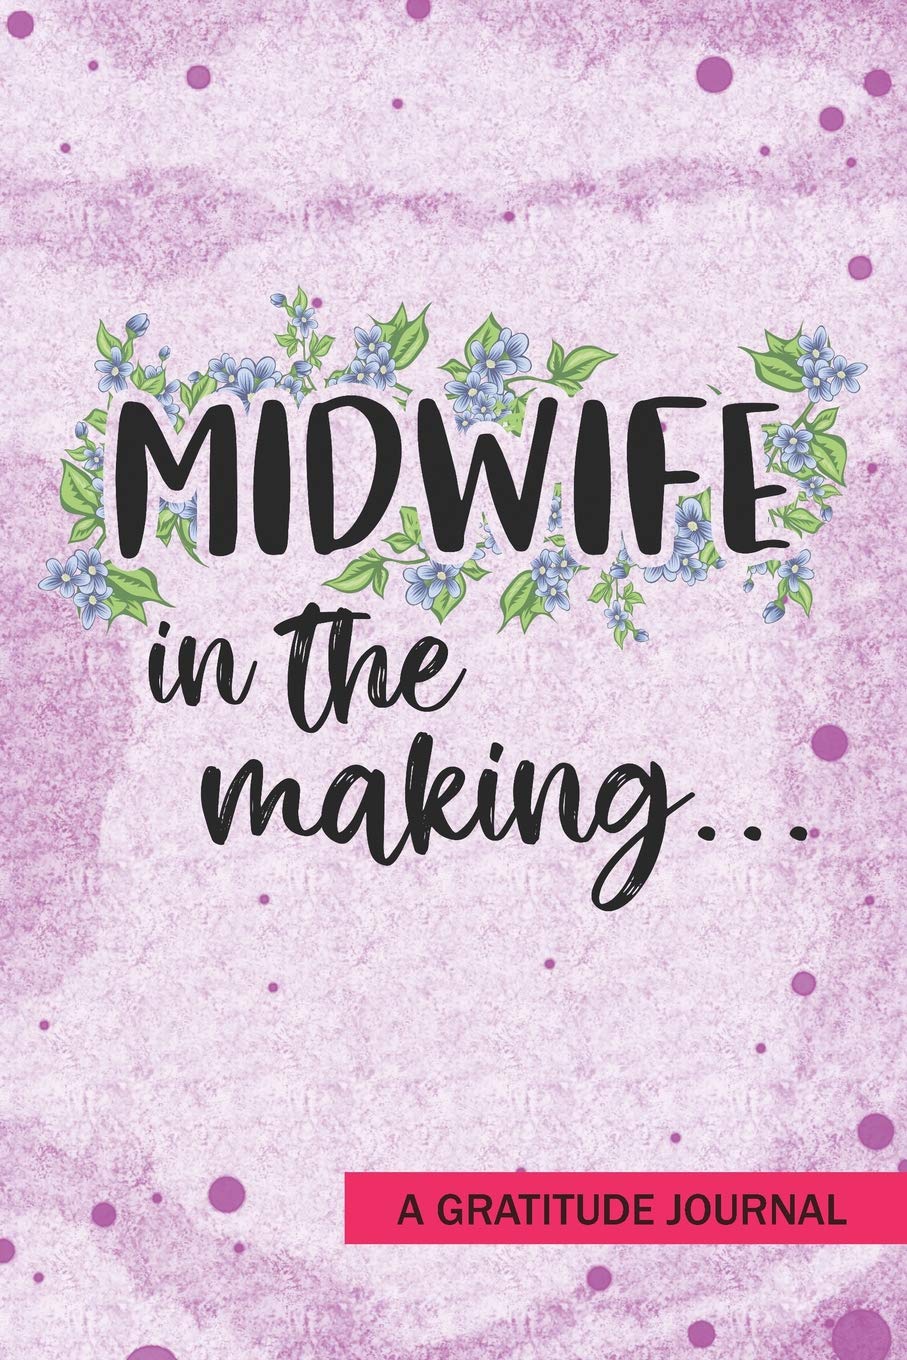 Midwife in the making Gratitude Journal: Beautiful Gratitude Journal for All Birth Workers, Midwifery Nurse, Future Midwives, Midwife Student gift, Doula Grandma / Baby Catcher Mom Gift: Notebooks, Own: 9781077620551